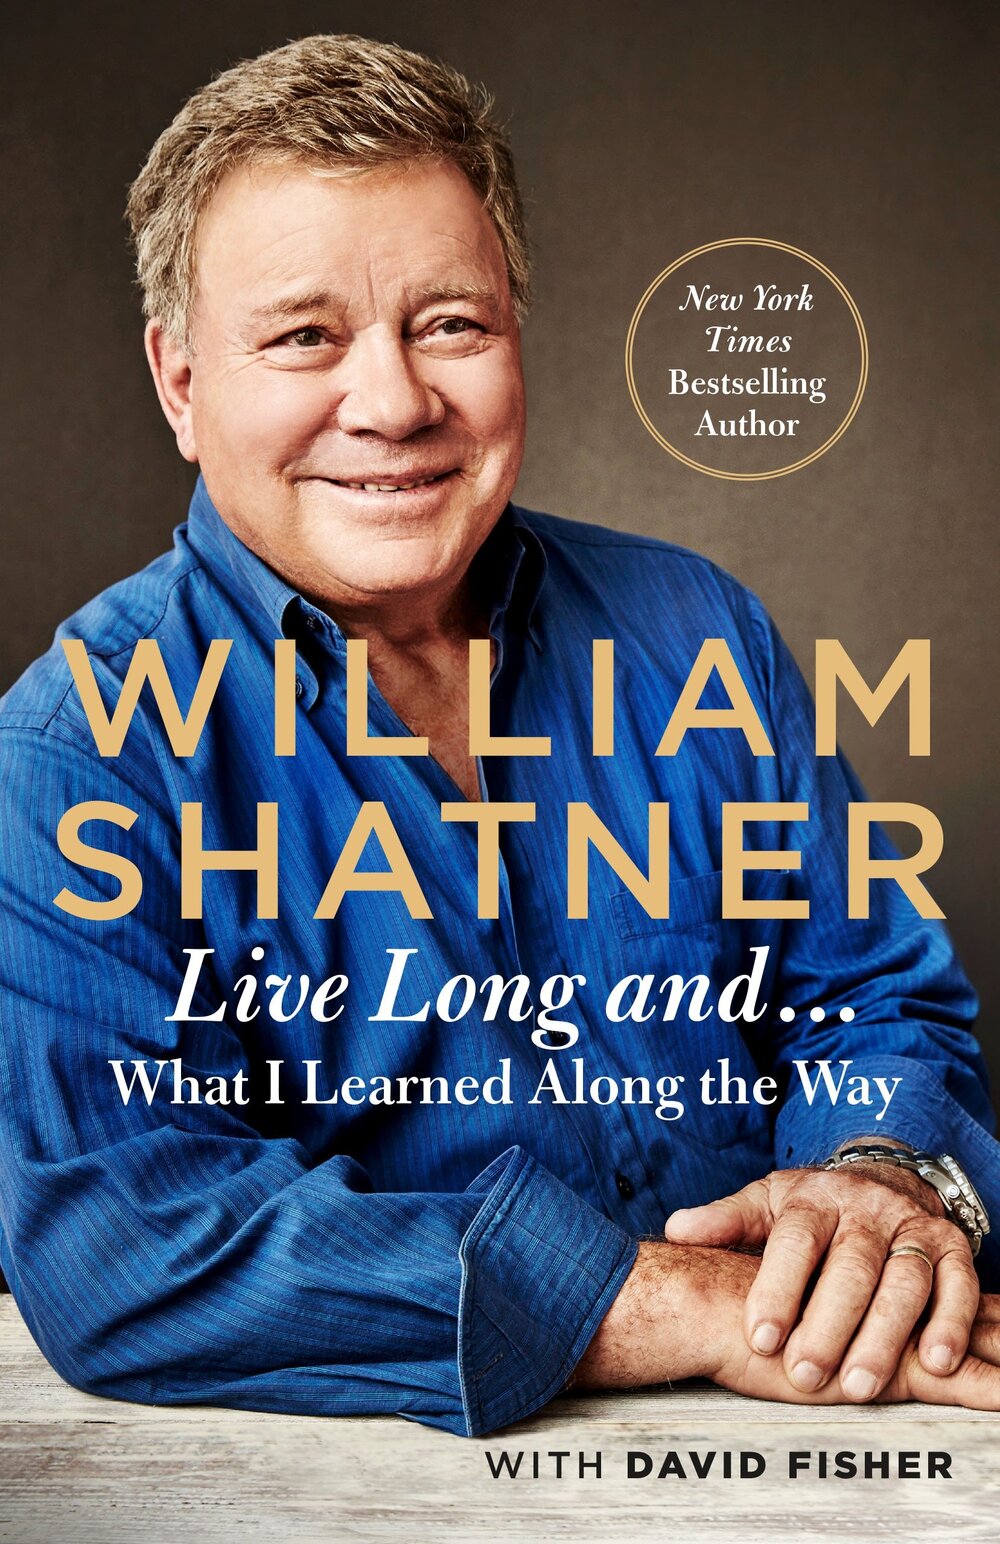 Live Long and... What I Learned Along the Way by William Shatner